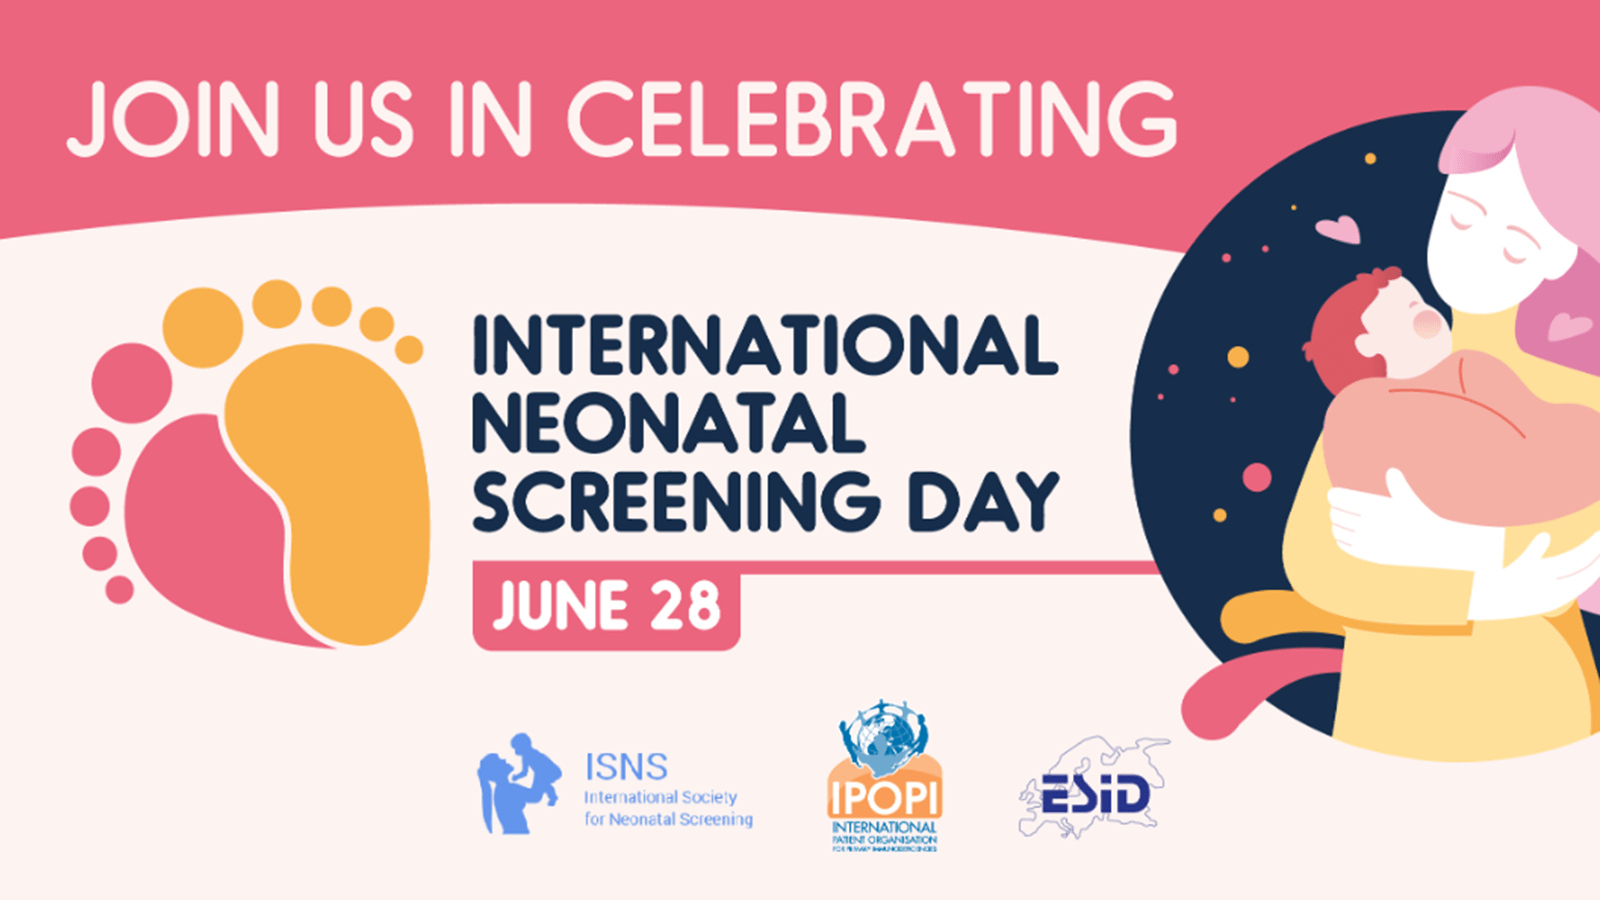 Join us in celebrating International Neonatal Screening Day with image of a mother and baby